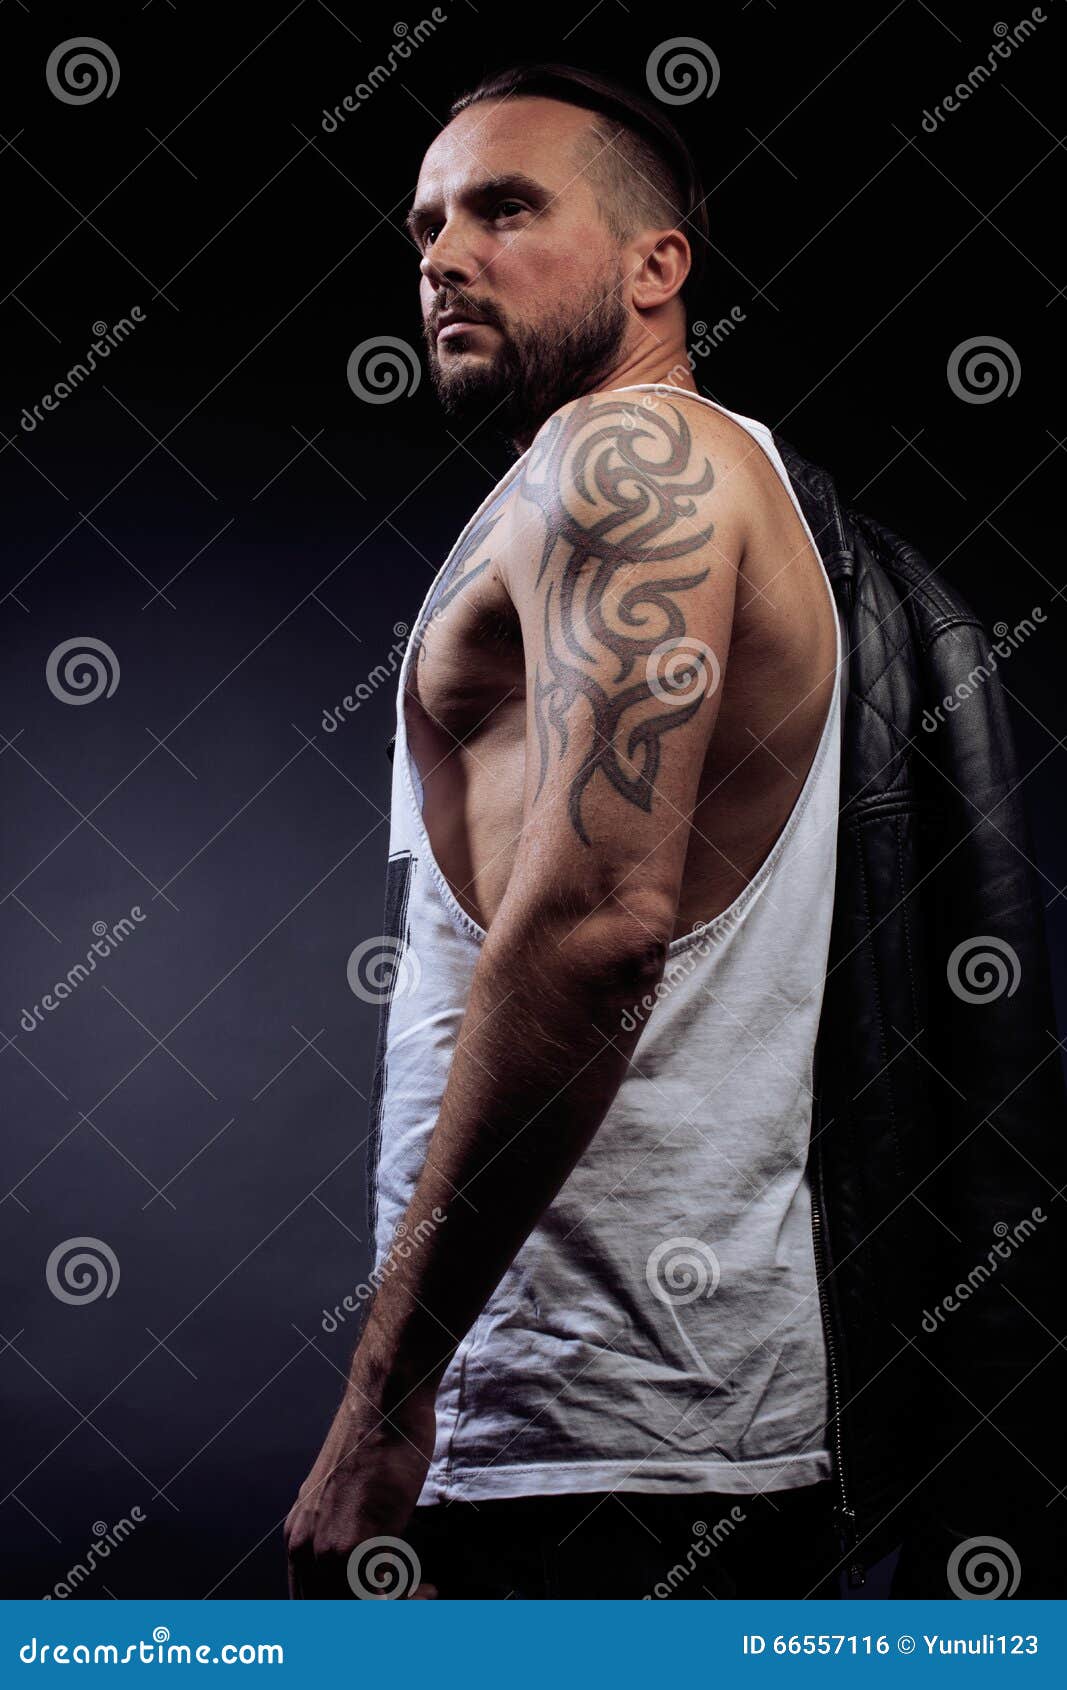 A Man With Tattooes On His Arms Silhouette Of Muscular Body